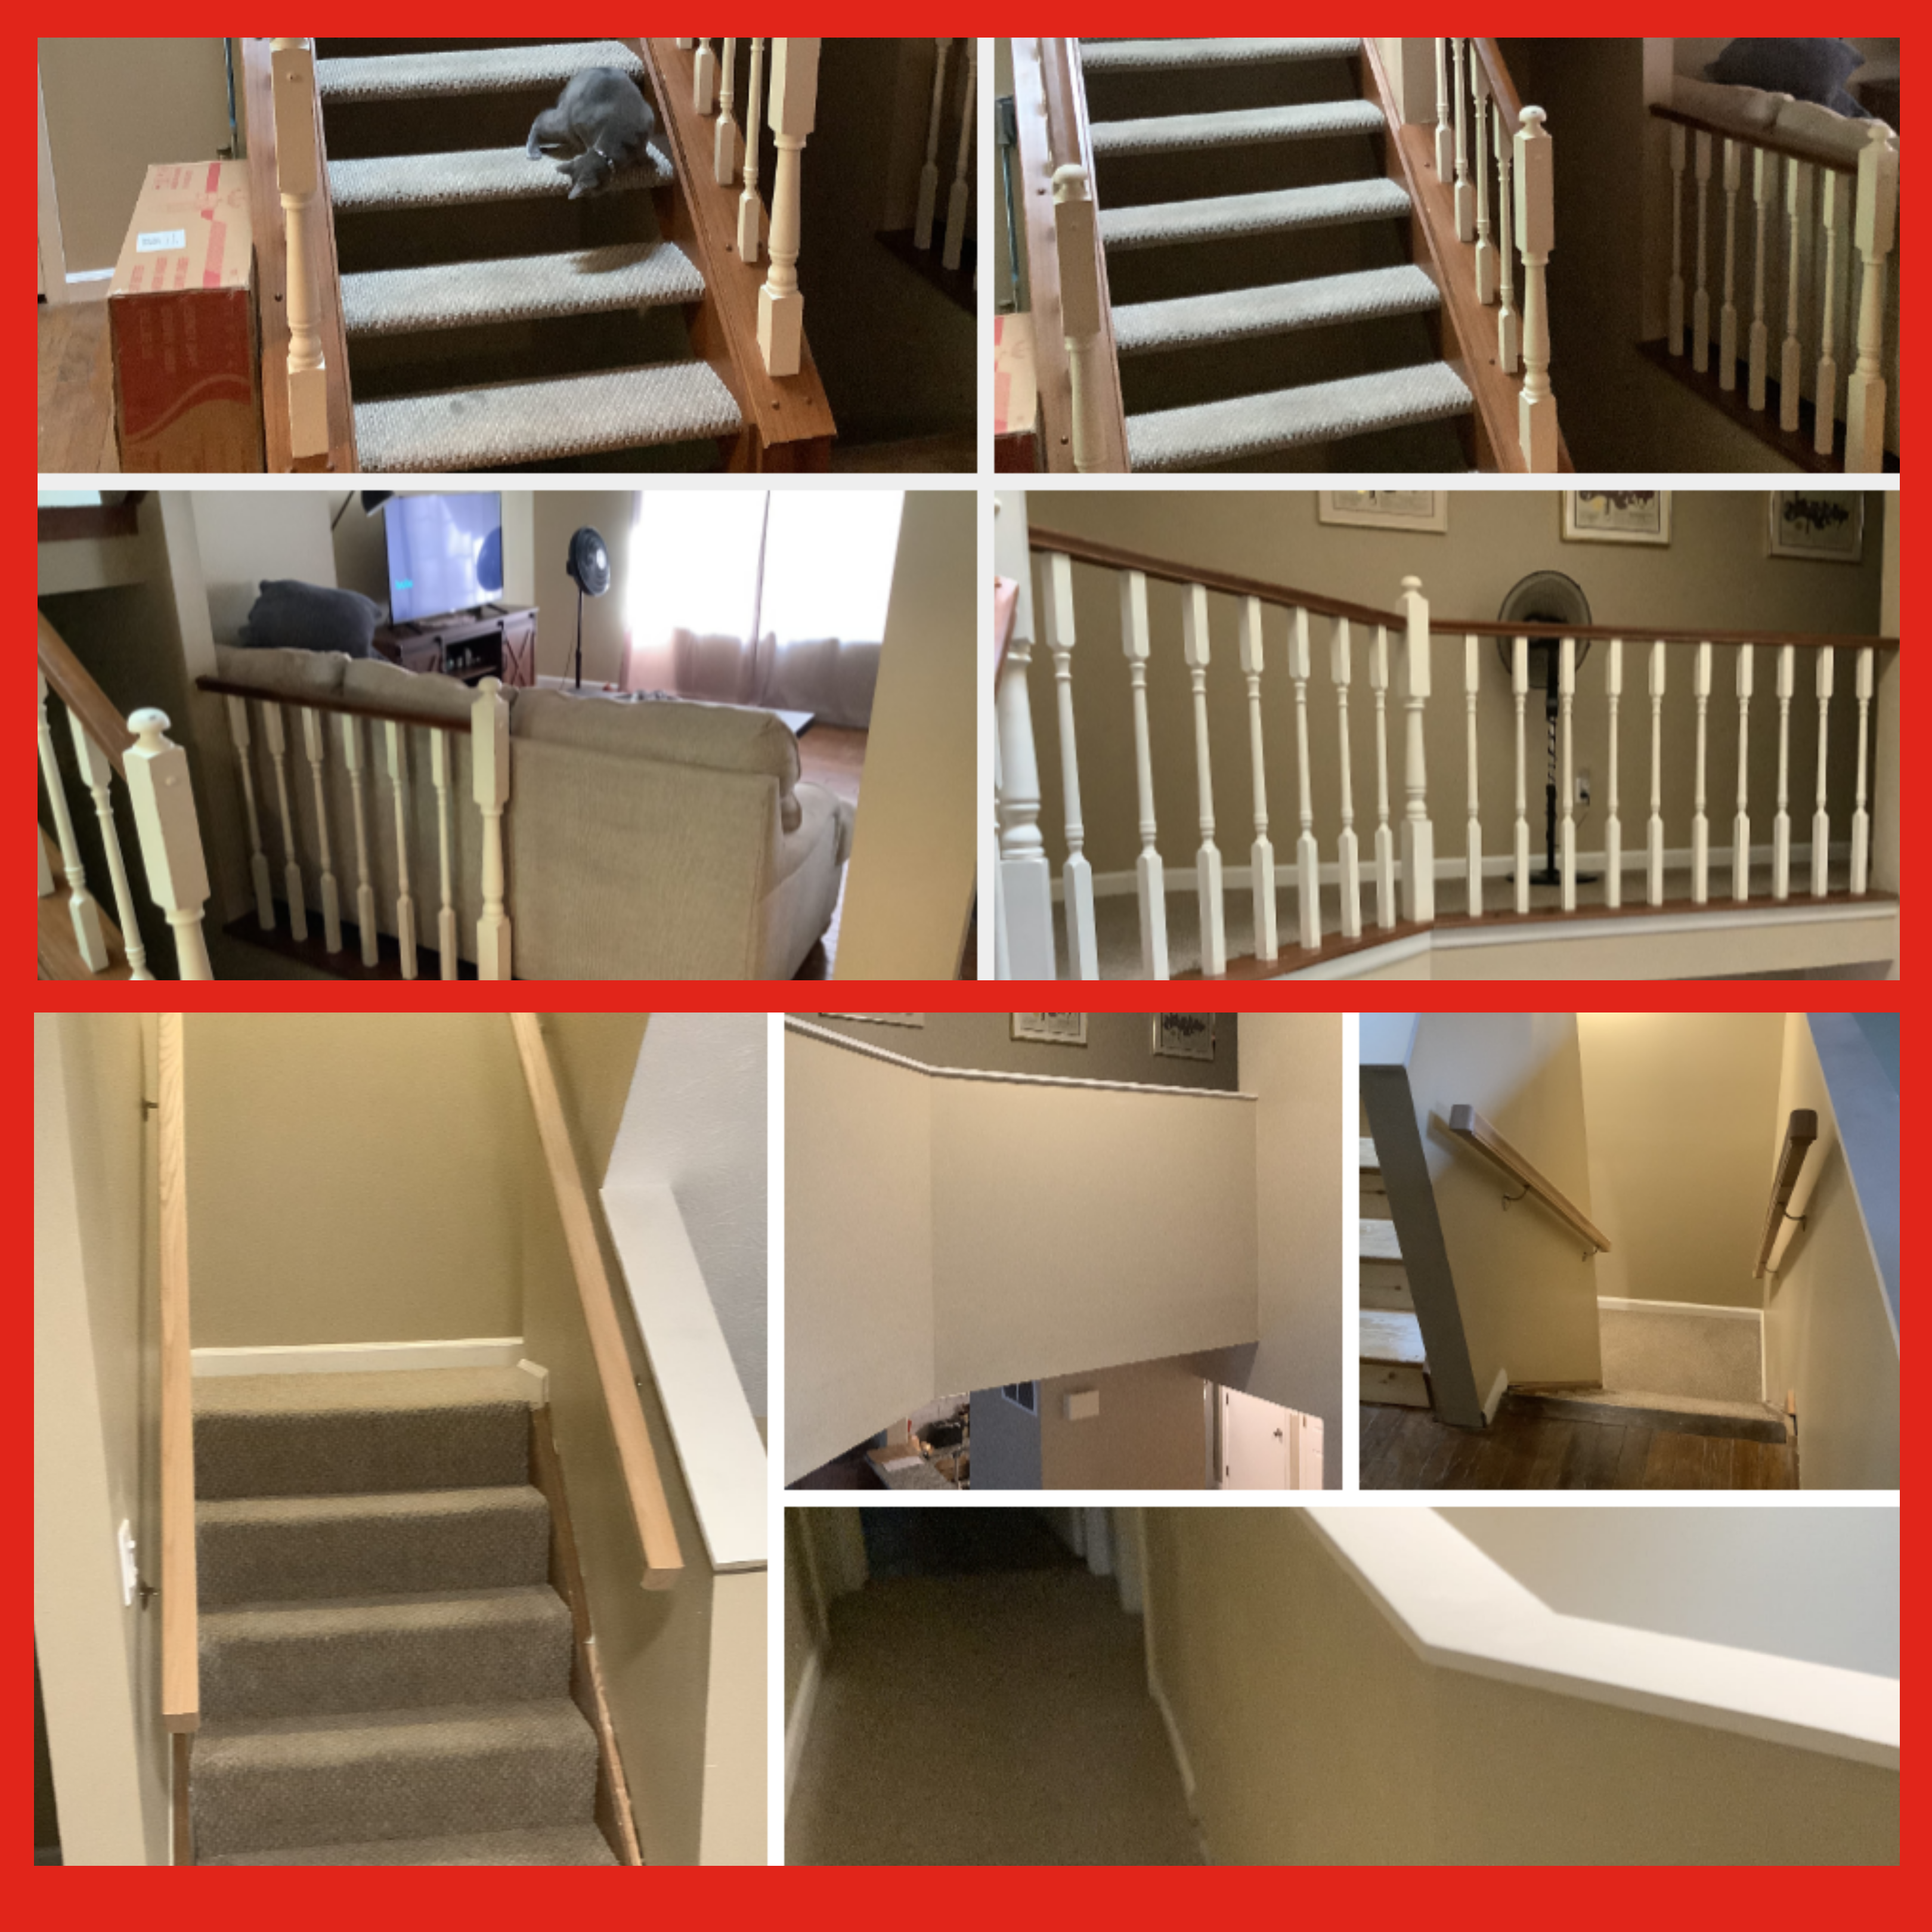 A set of stairs and a landing in a home before and after the railing has been replaced with drywall by Mr. Handyman.